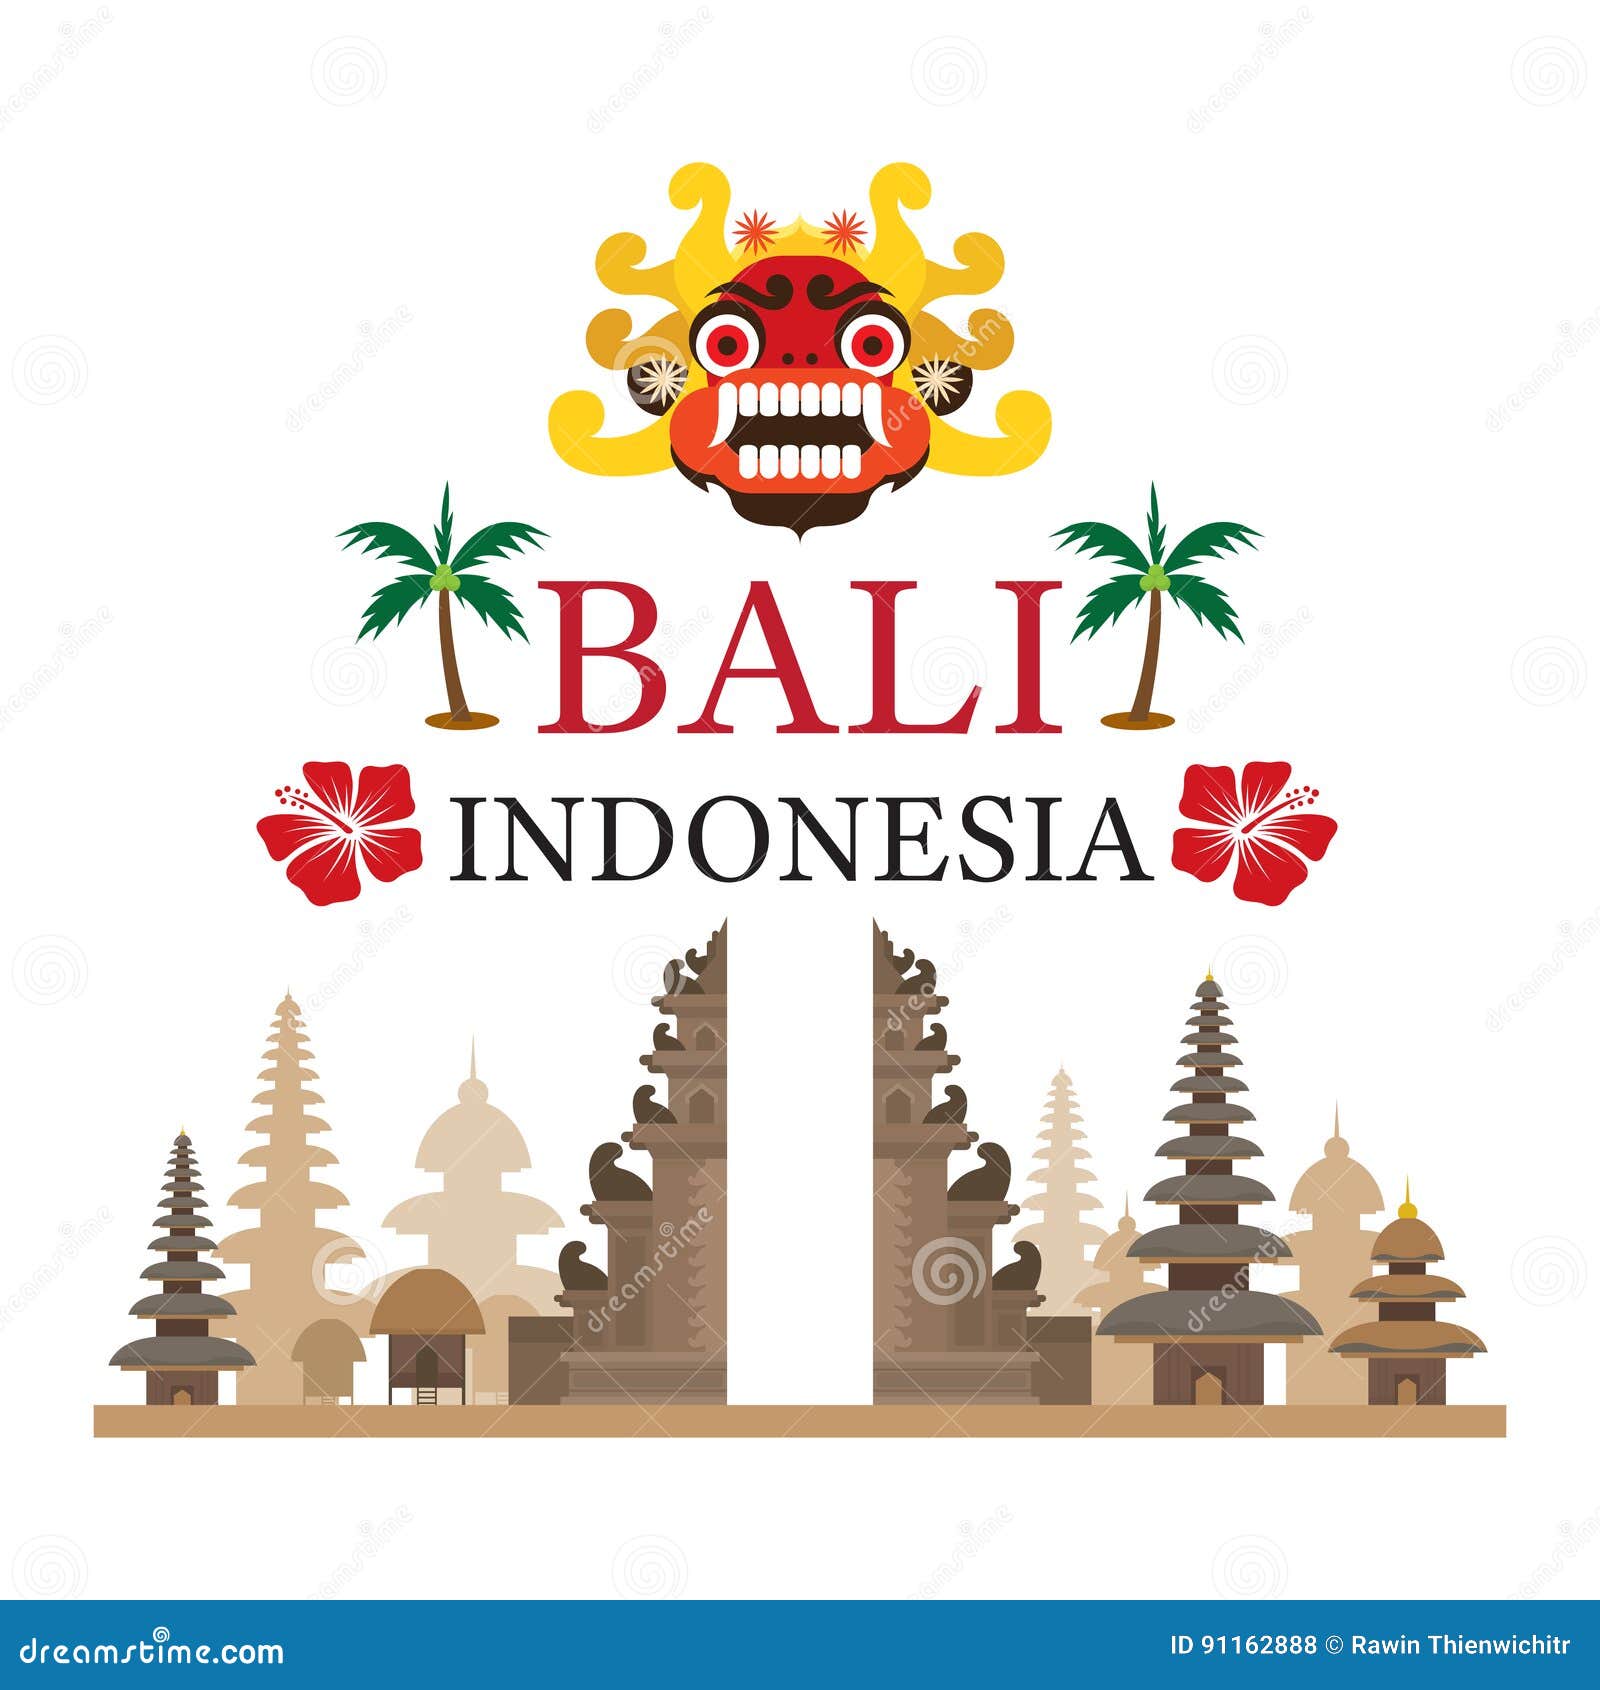 bali, indonesia travel and attraction